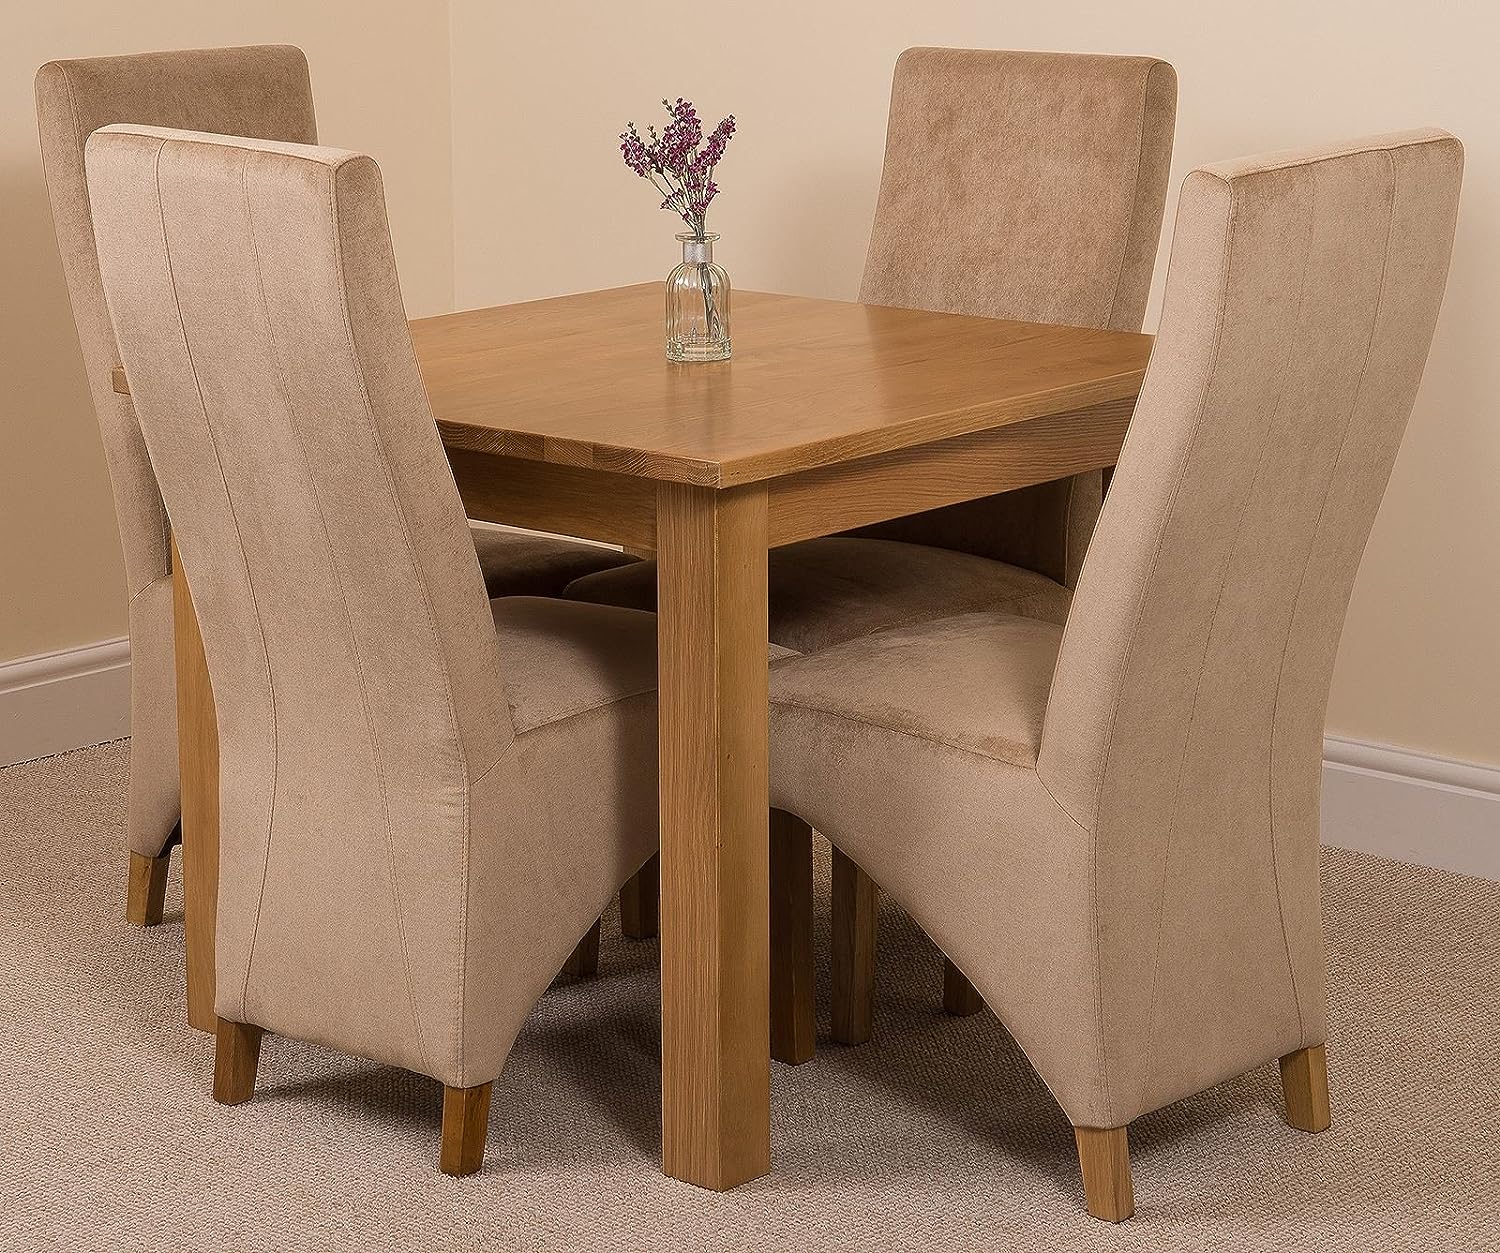 Compact Dining Table And Chairs